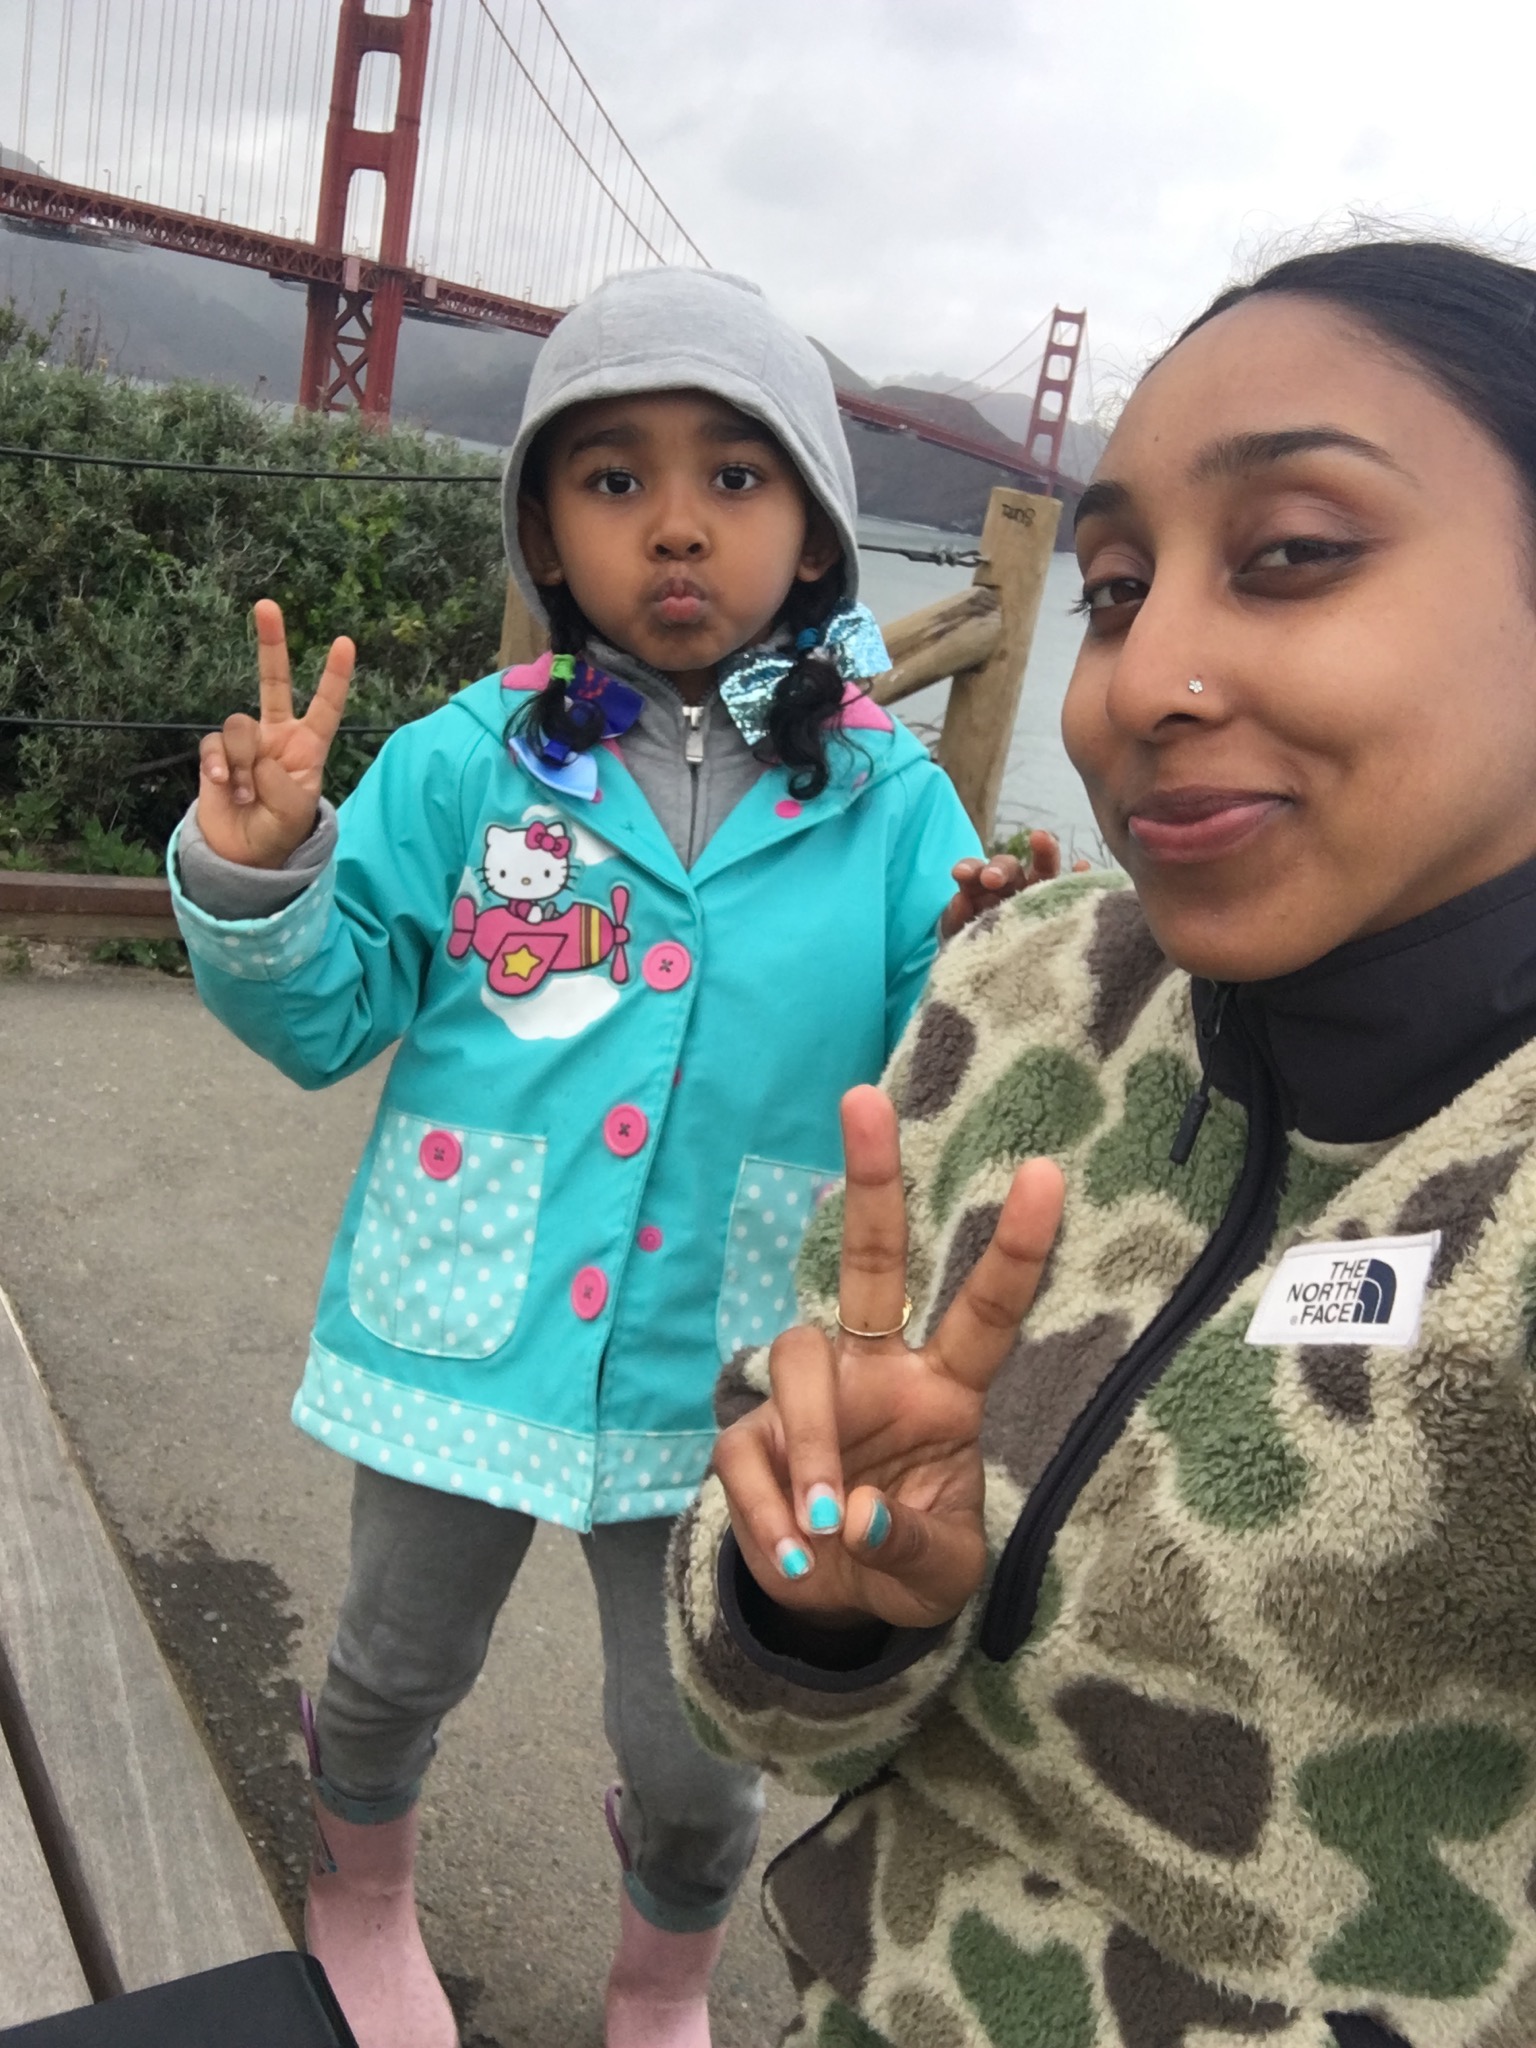 A photo of Maile and her daughter by the Golden Gate Bridge.